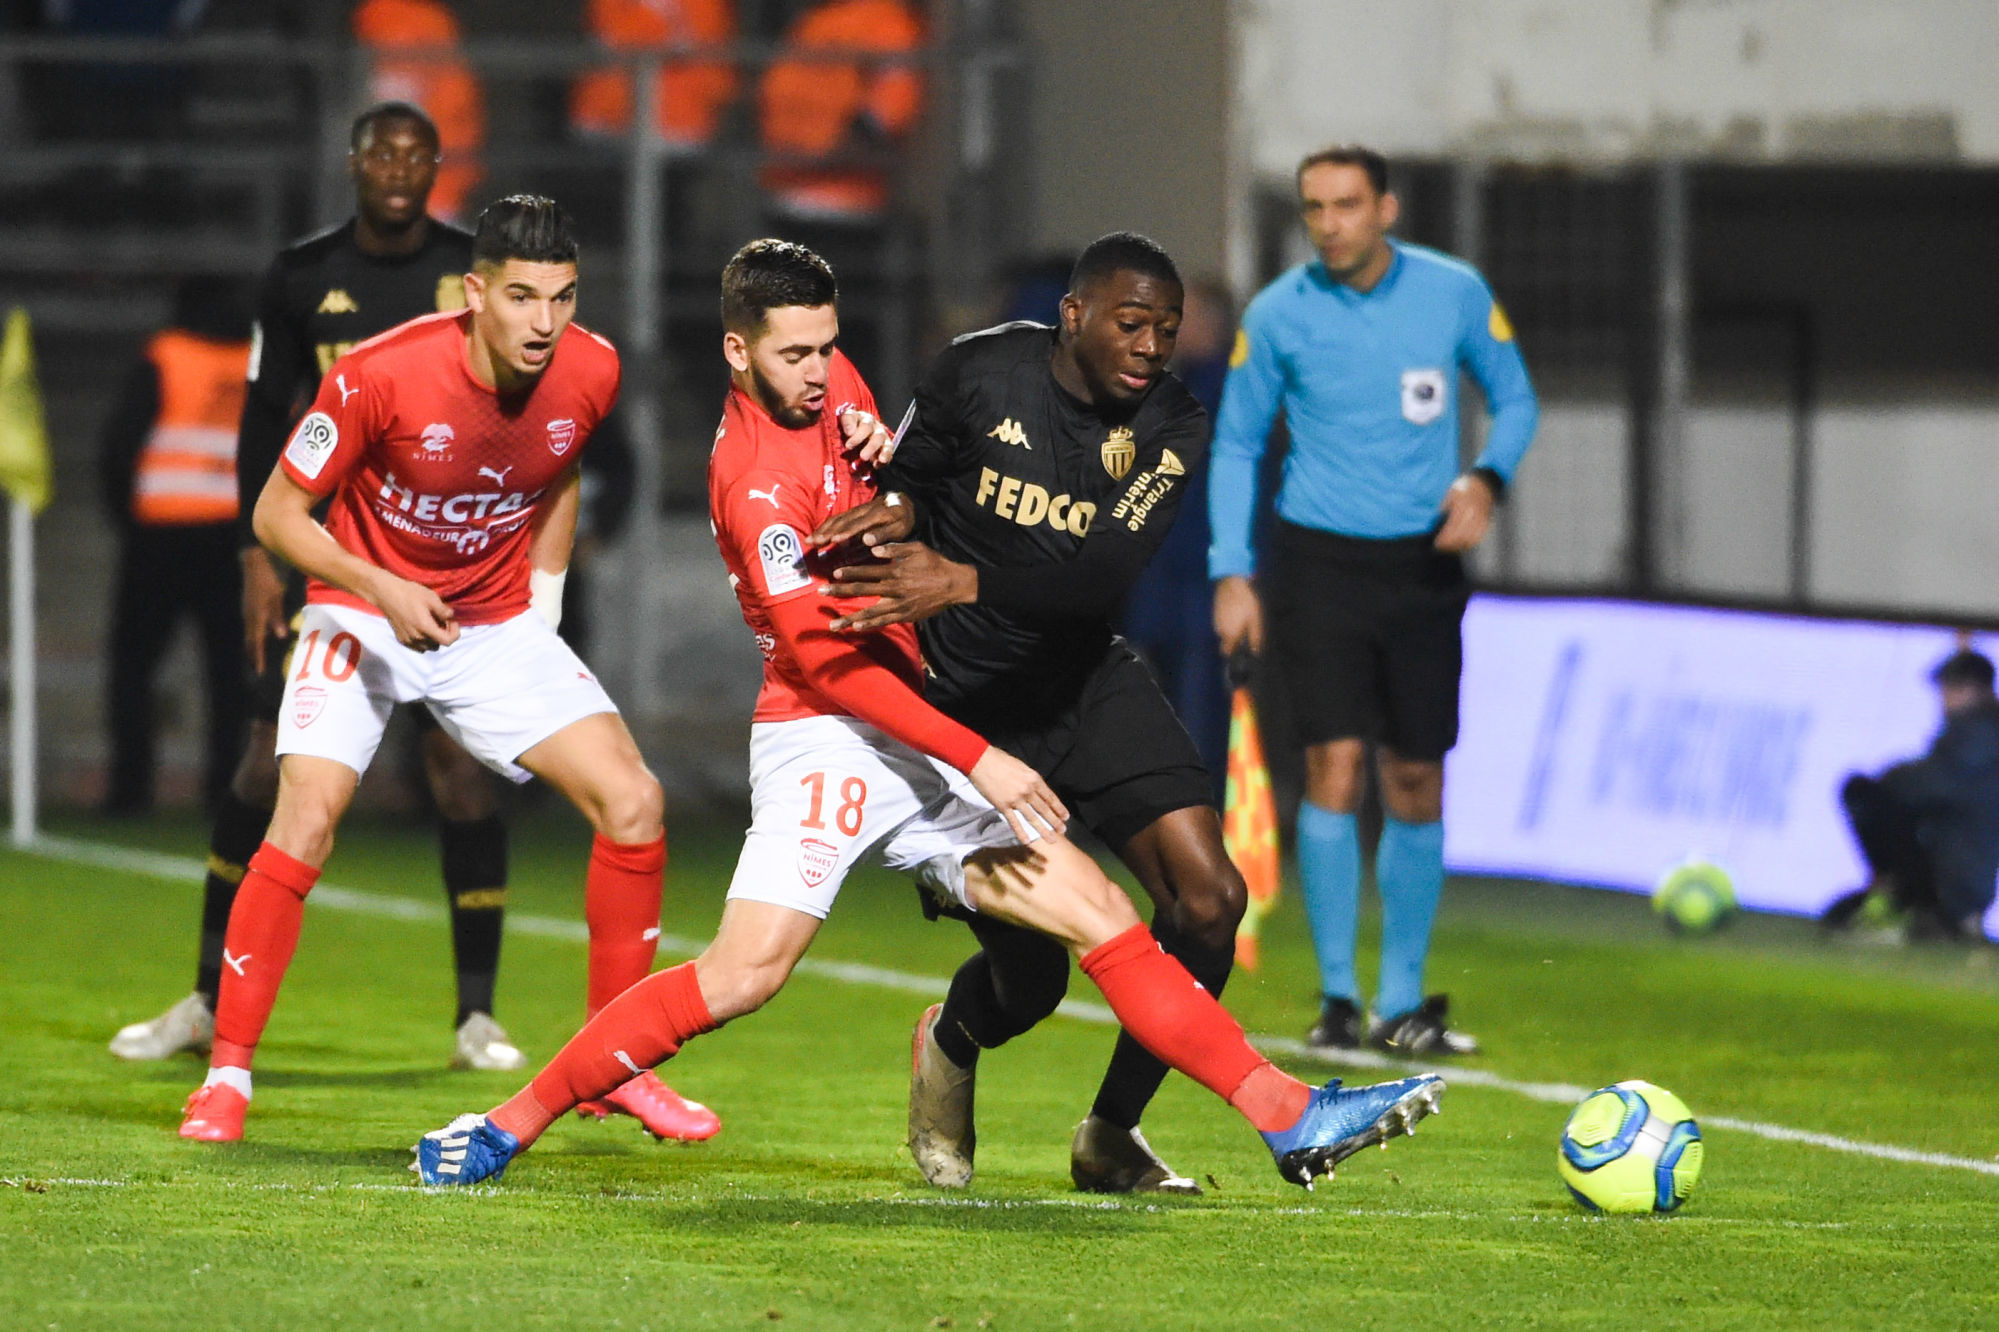 Youssouf FOFANA of Monaco and Theo VALLS of Nimes  during the Ligue 1 match between Nimes and Monaco at Stade des Costieres on February 1, 2020 in Nimes, France. (Photo by Alexandre Dimou/Icon Sport) - Stade des Costières - Nimes (France)